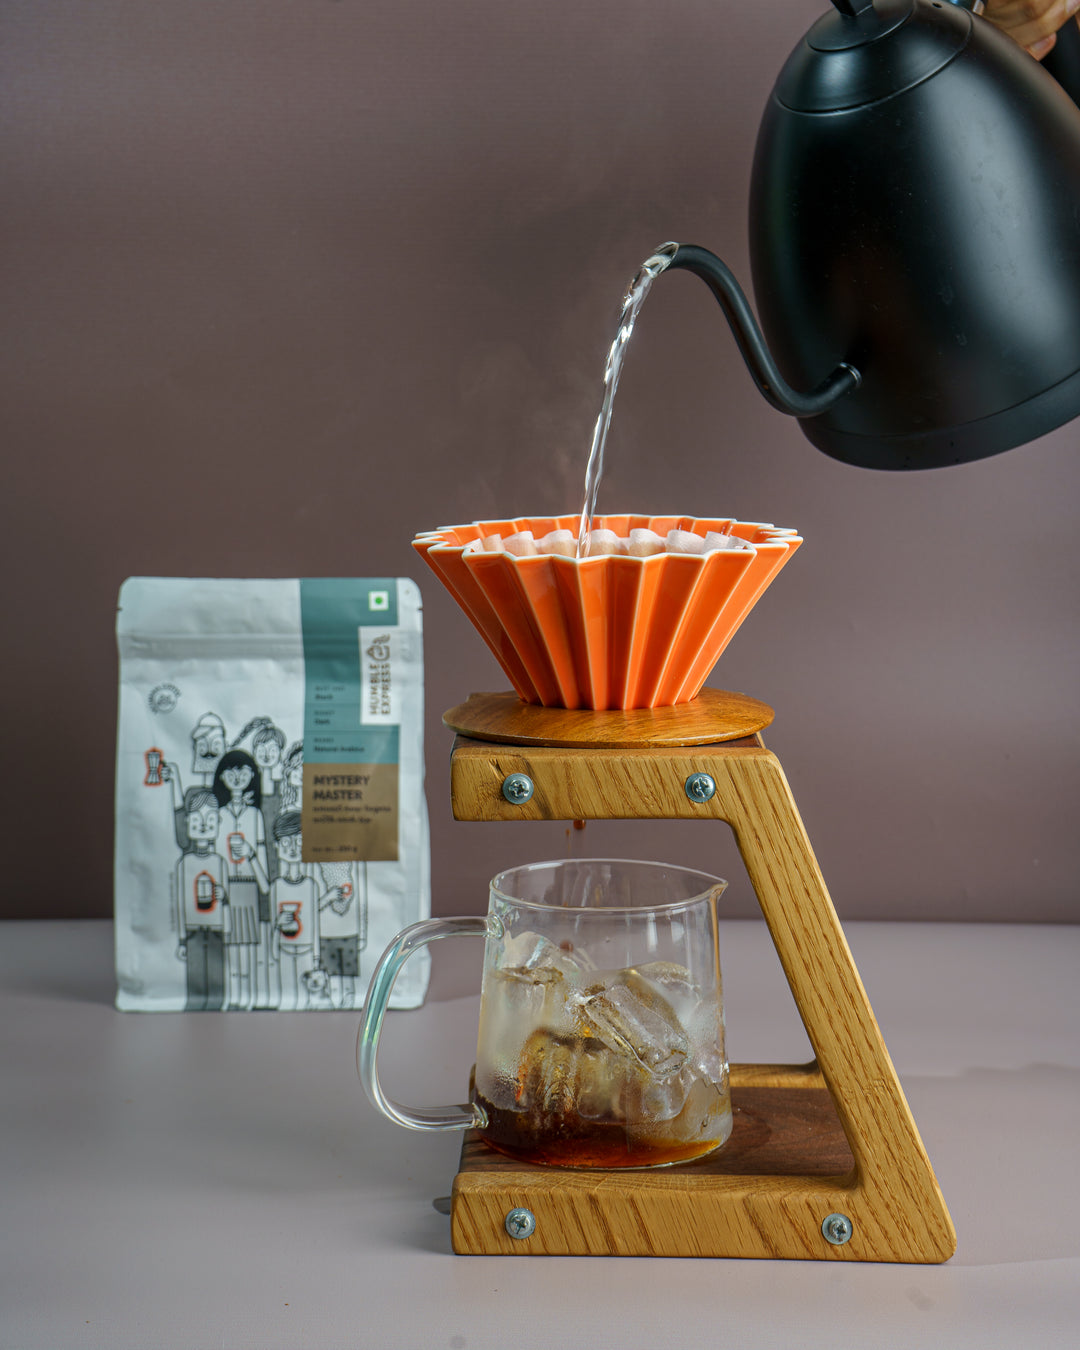 How To Make A Pour-Over Coffee with Kalita Wave